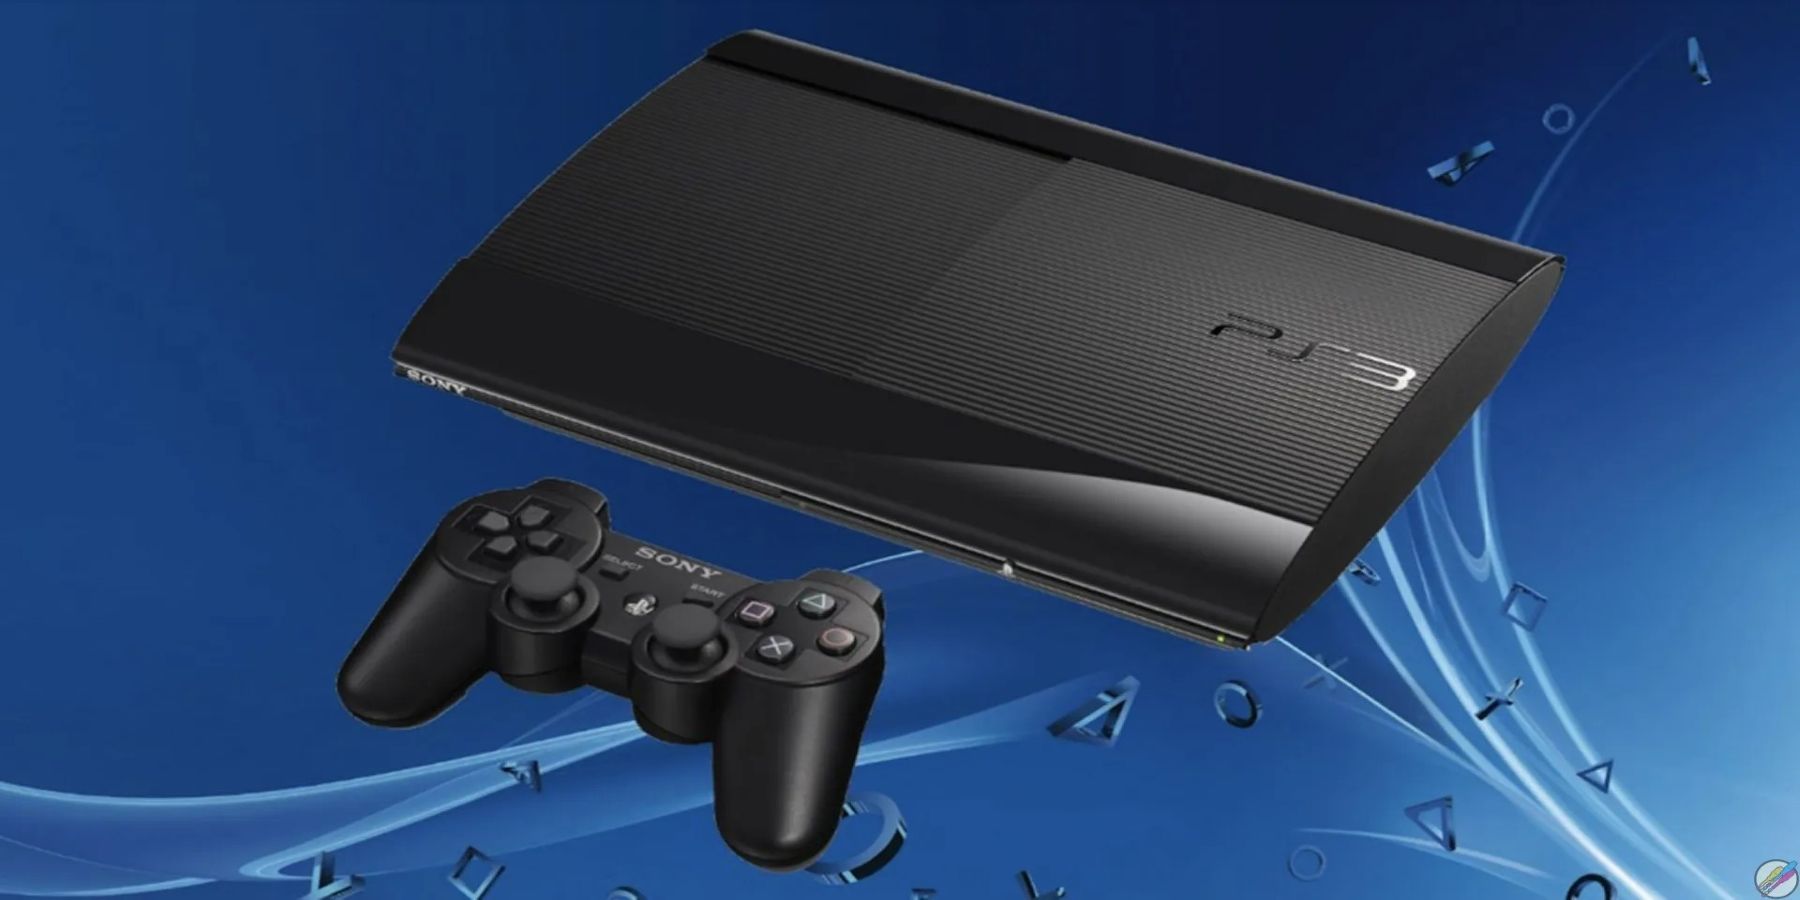 PS3, PS Vita Players Can't Download Purchased Games From PS Store